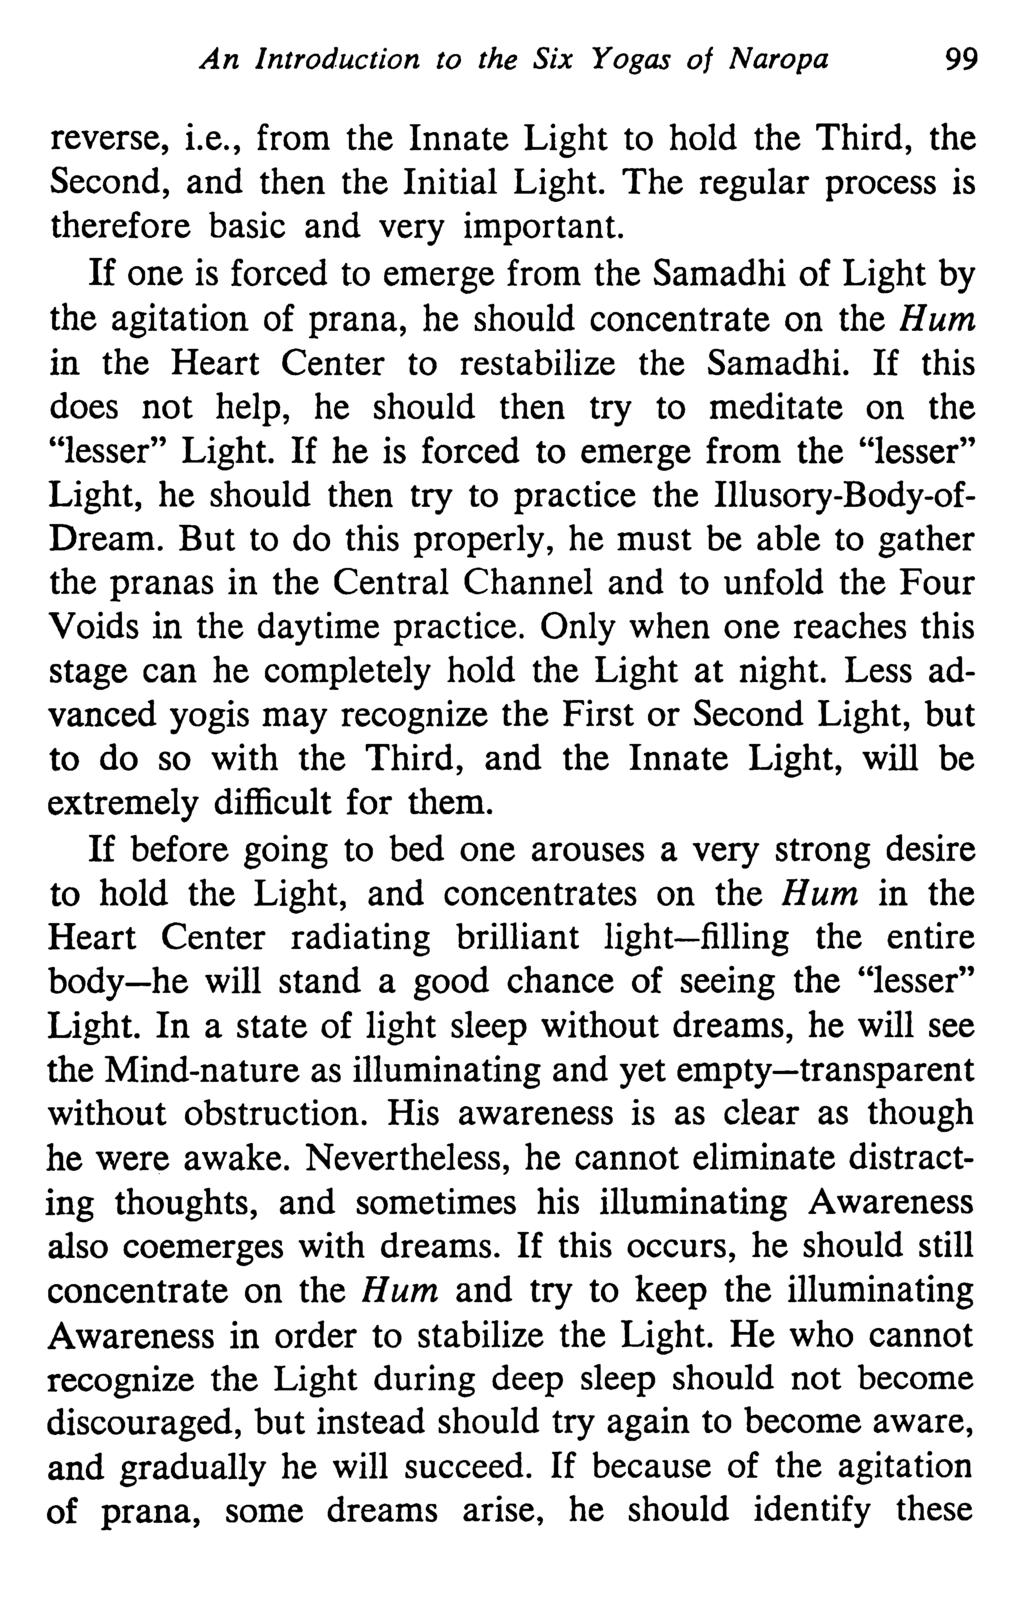 An Introduction to the Six Yogas of Naropa 99 reverse, i.e., from the Innate Light to hold the Third, the Second, and then the Initial Light. The regular process is therefore basic and very important.